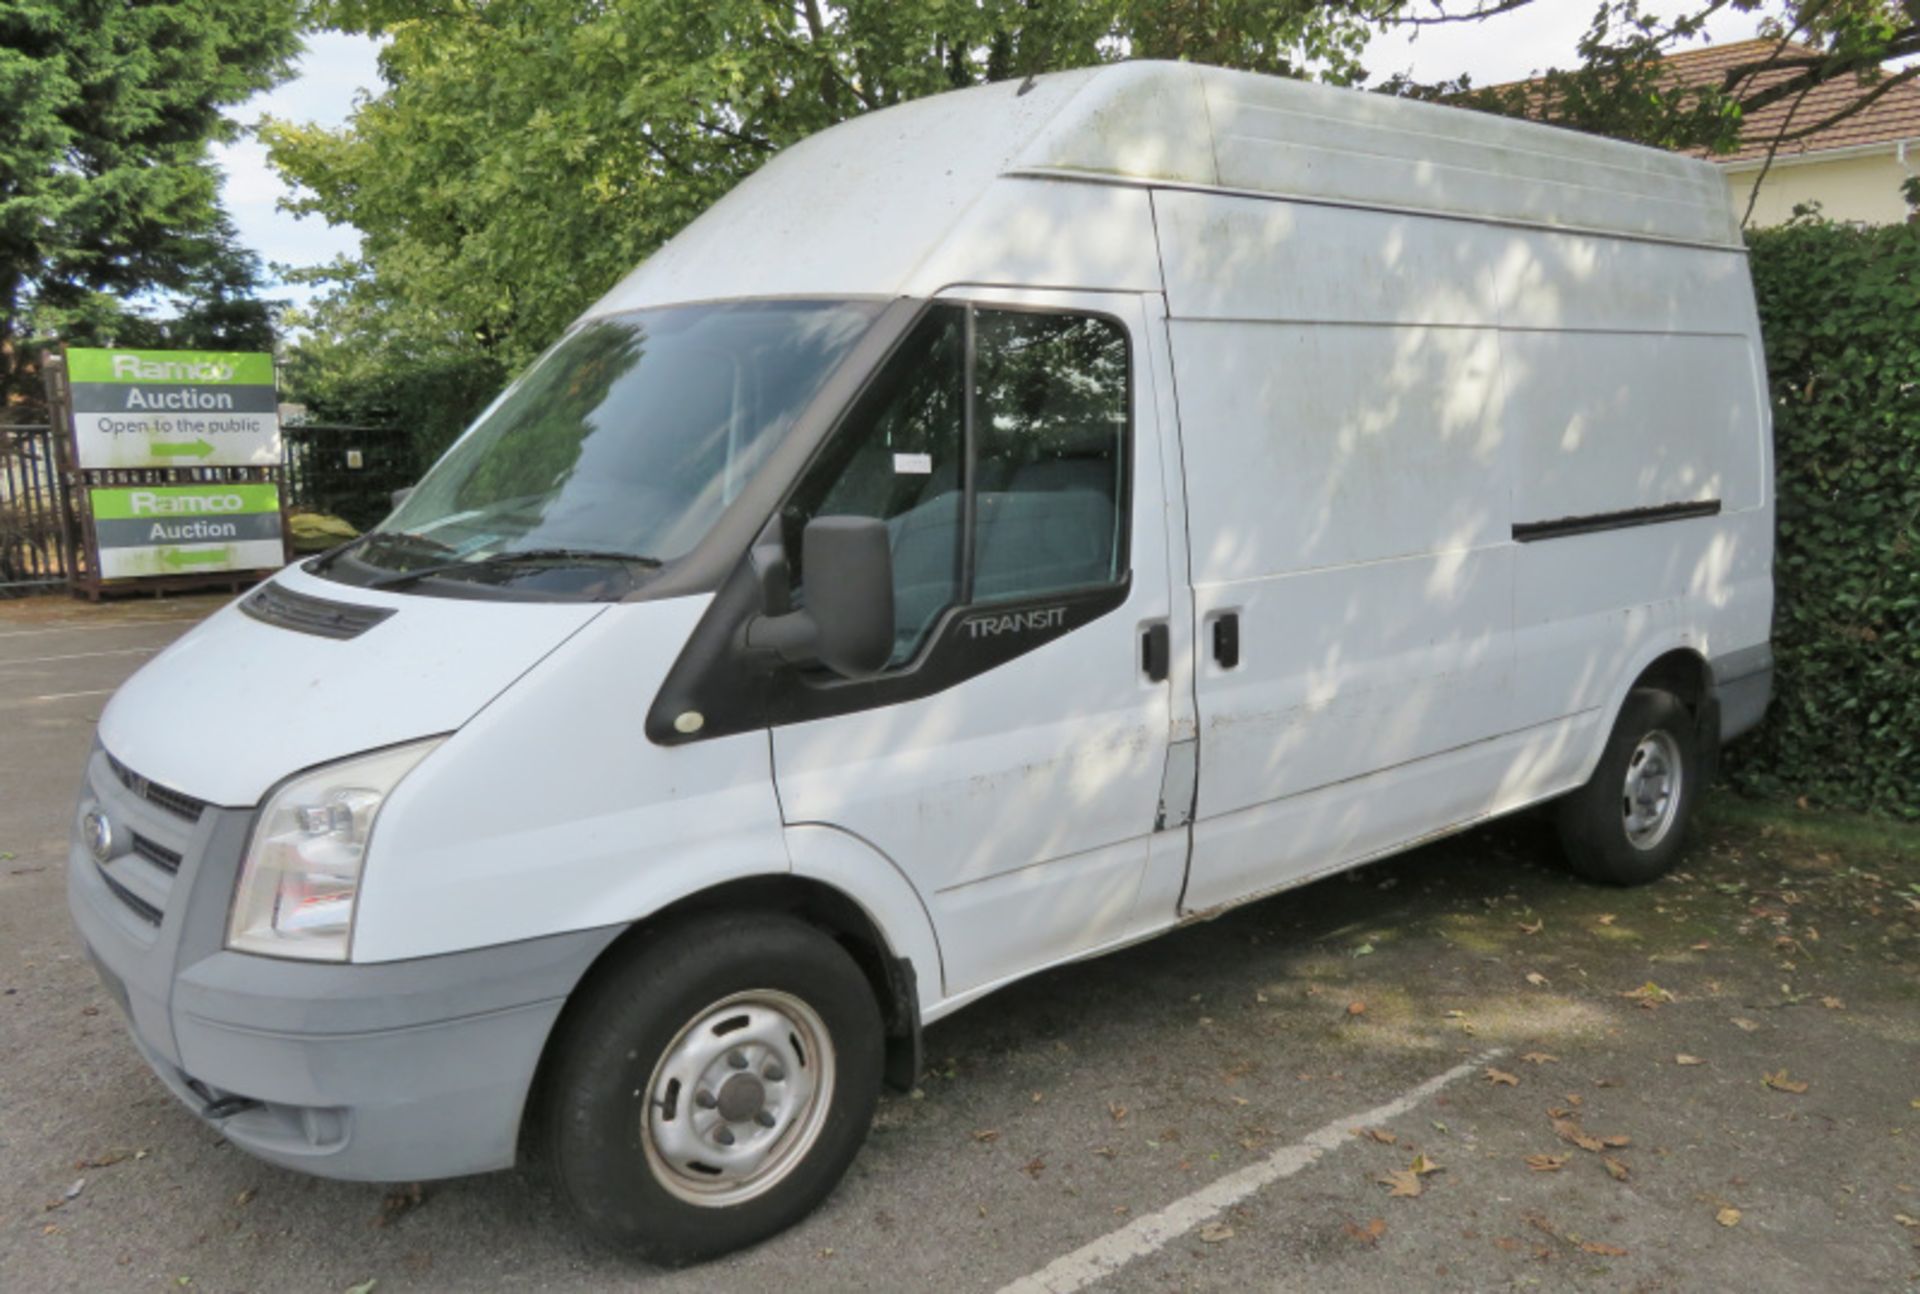 Ford Transit High Van Roof, Petrol, Mileage 33357 mile, Air conditioning, Runs & drives well on - Image 3 of 21